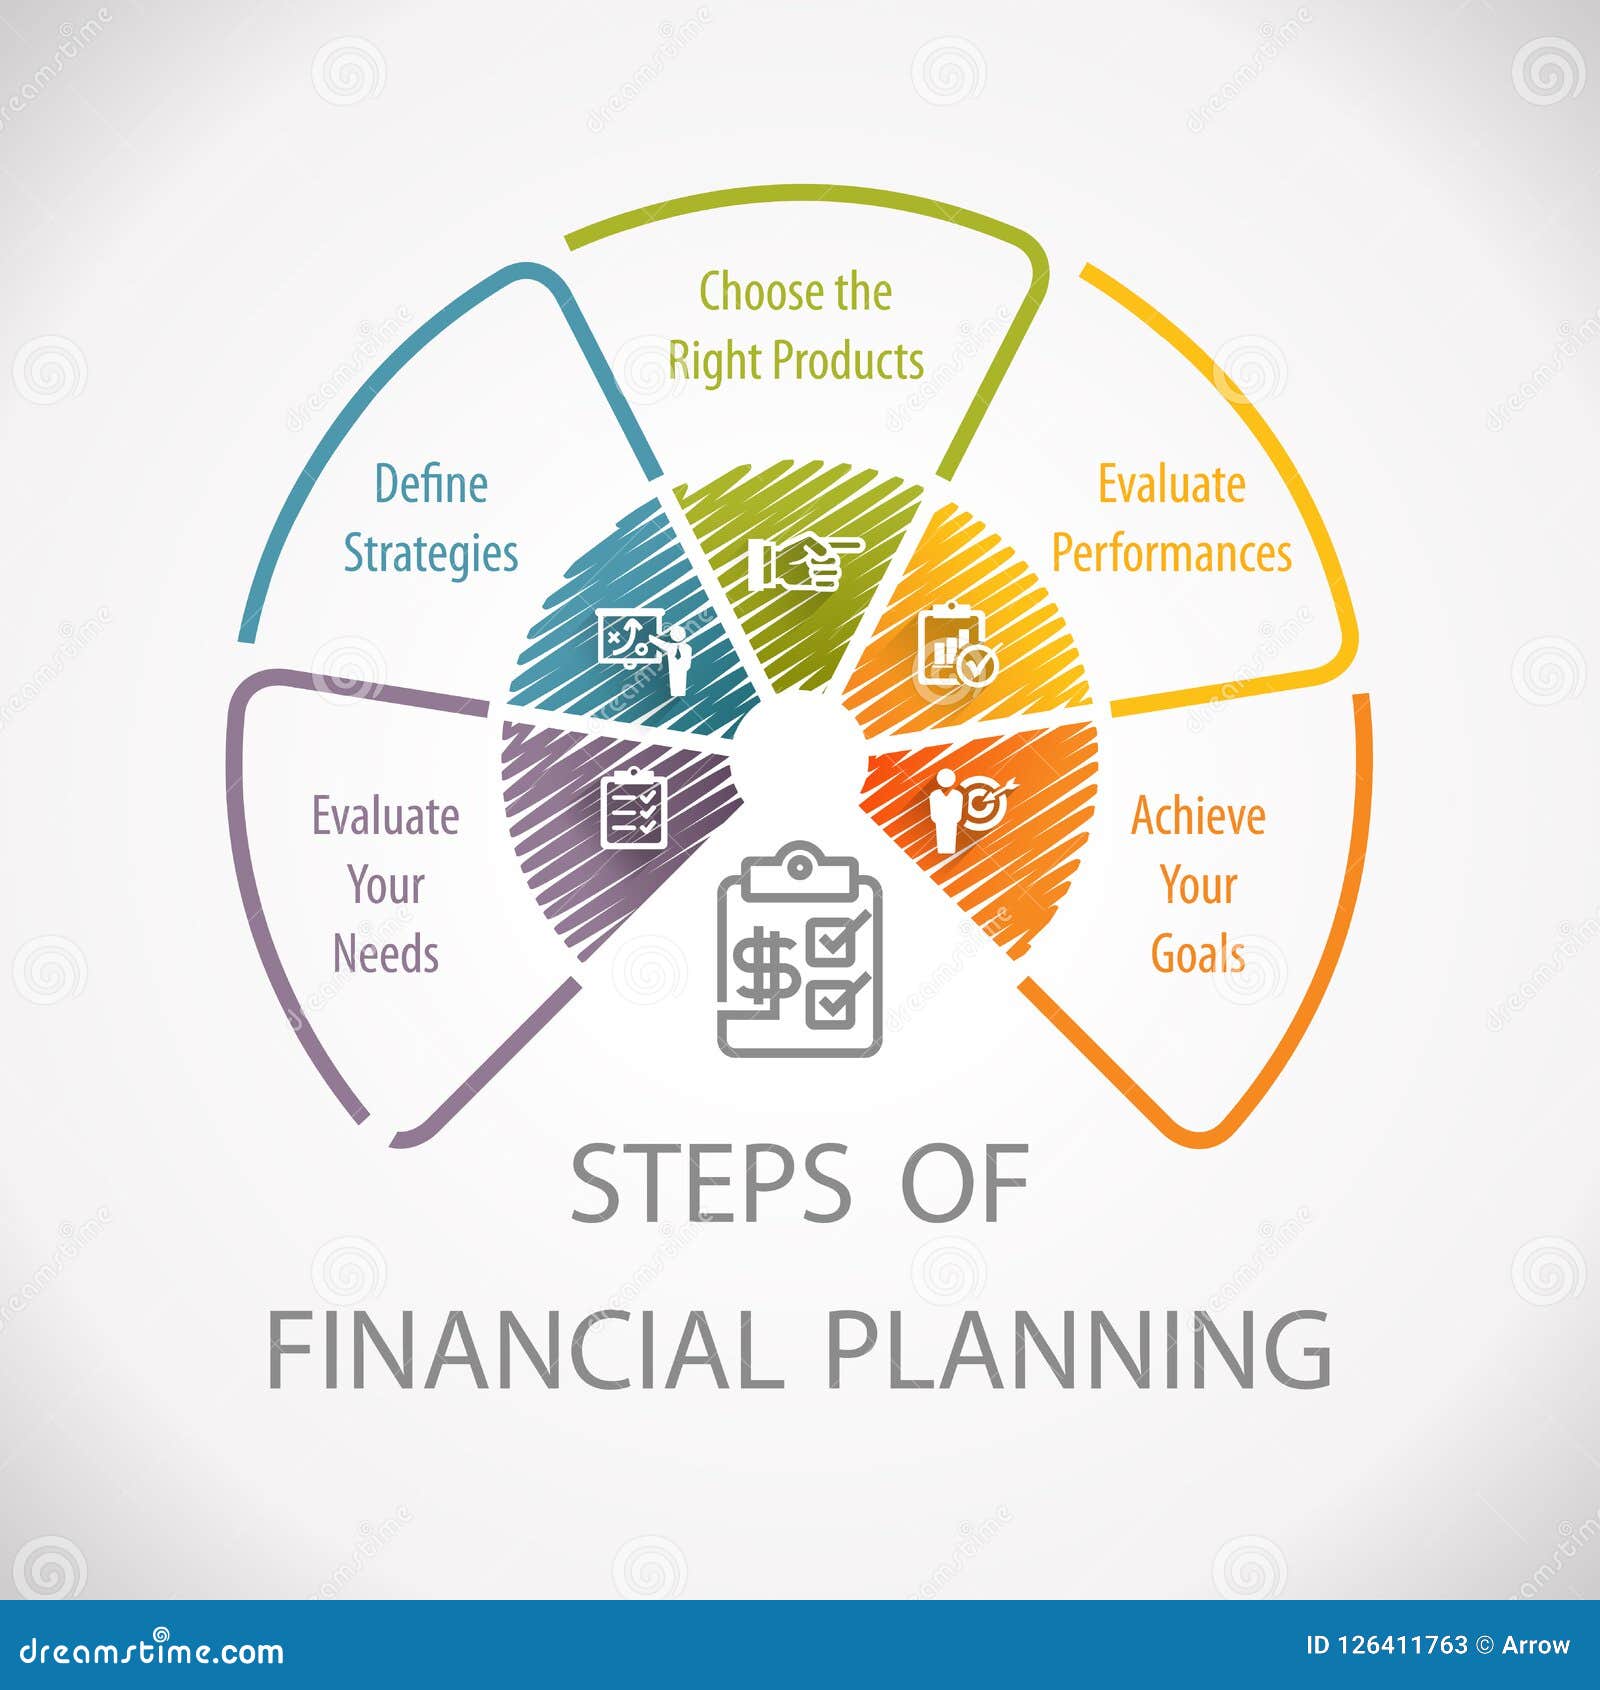 features of strategic financial planning